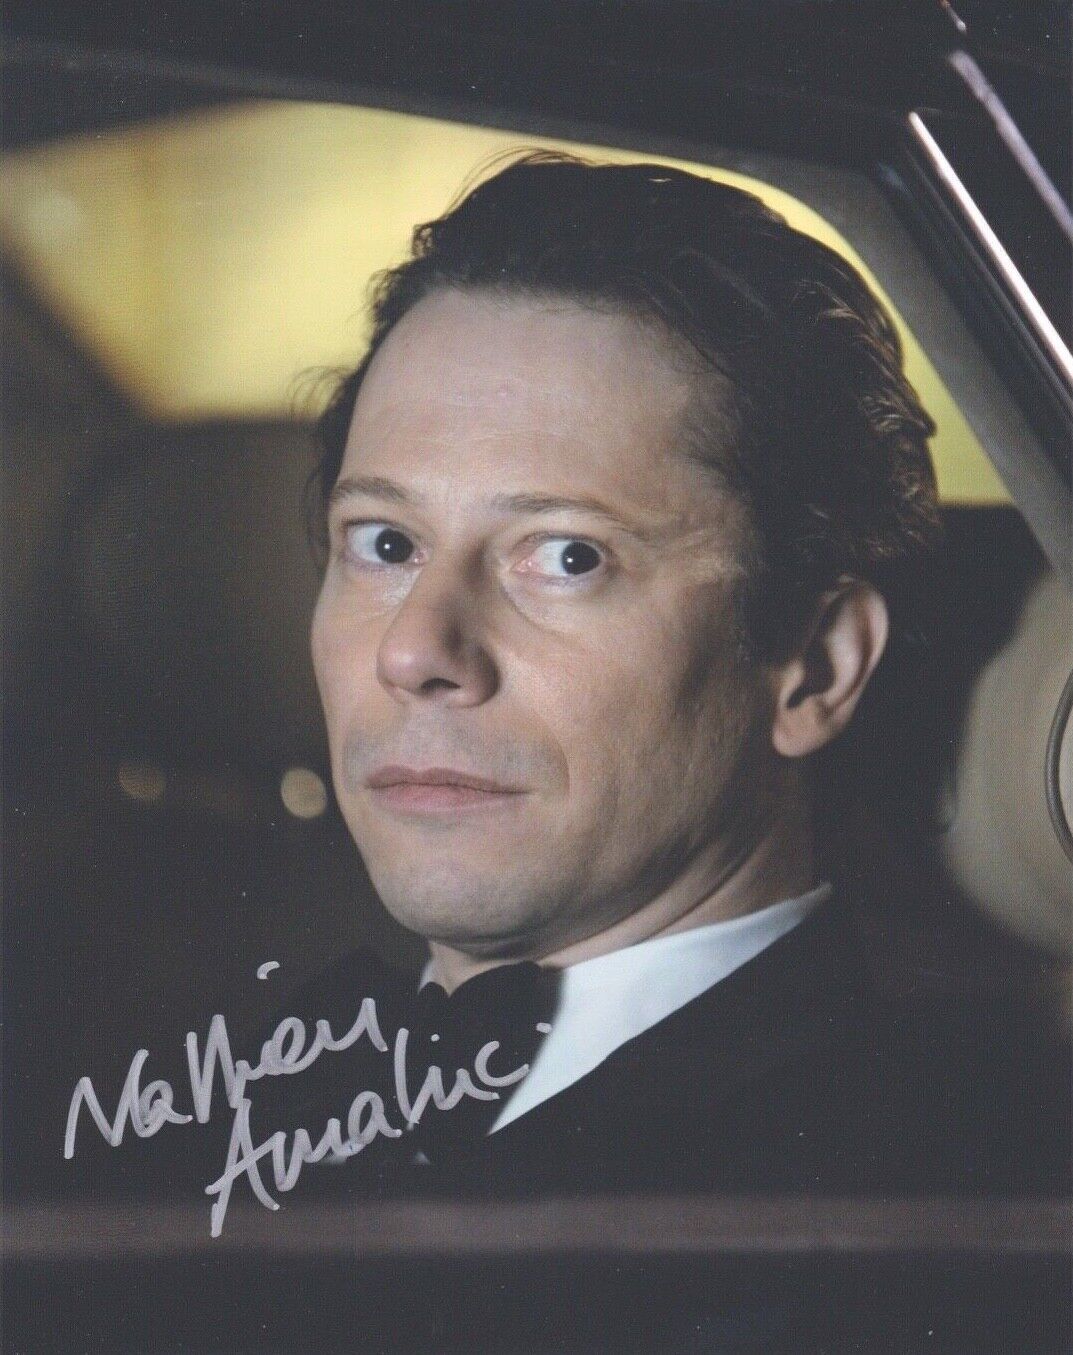 Signed Original Color Photo Poster painting of Matthieu Amalric of Quantum of Solace